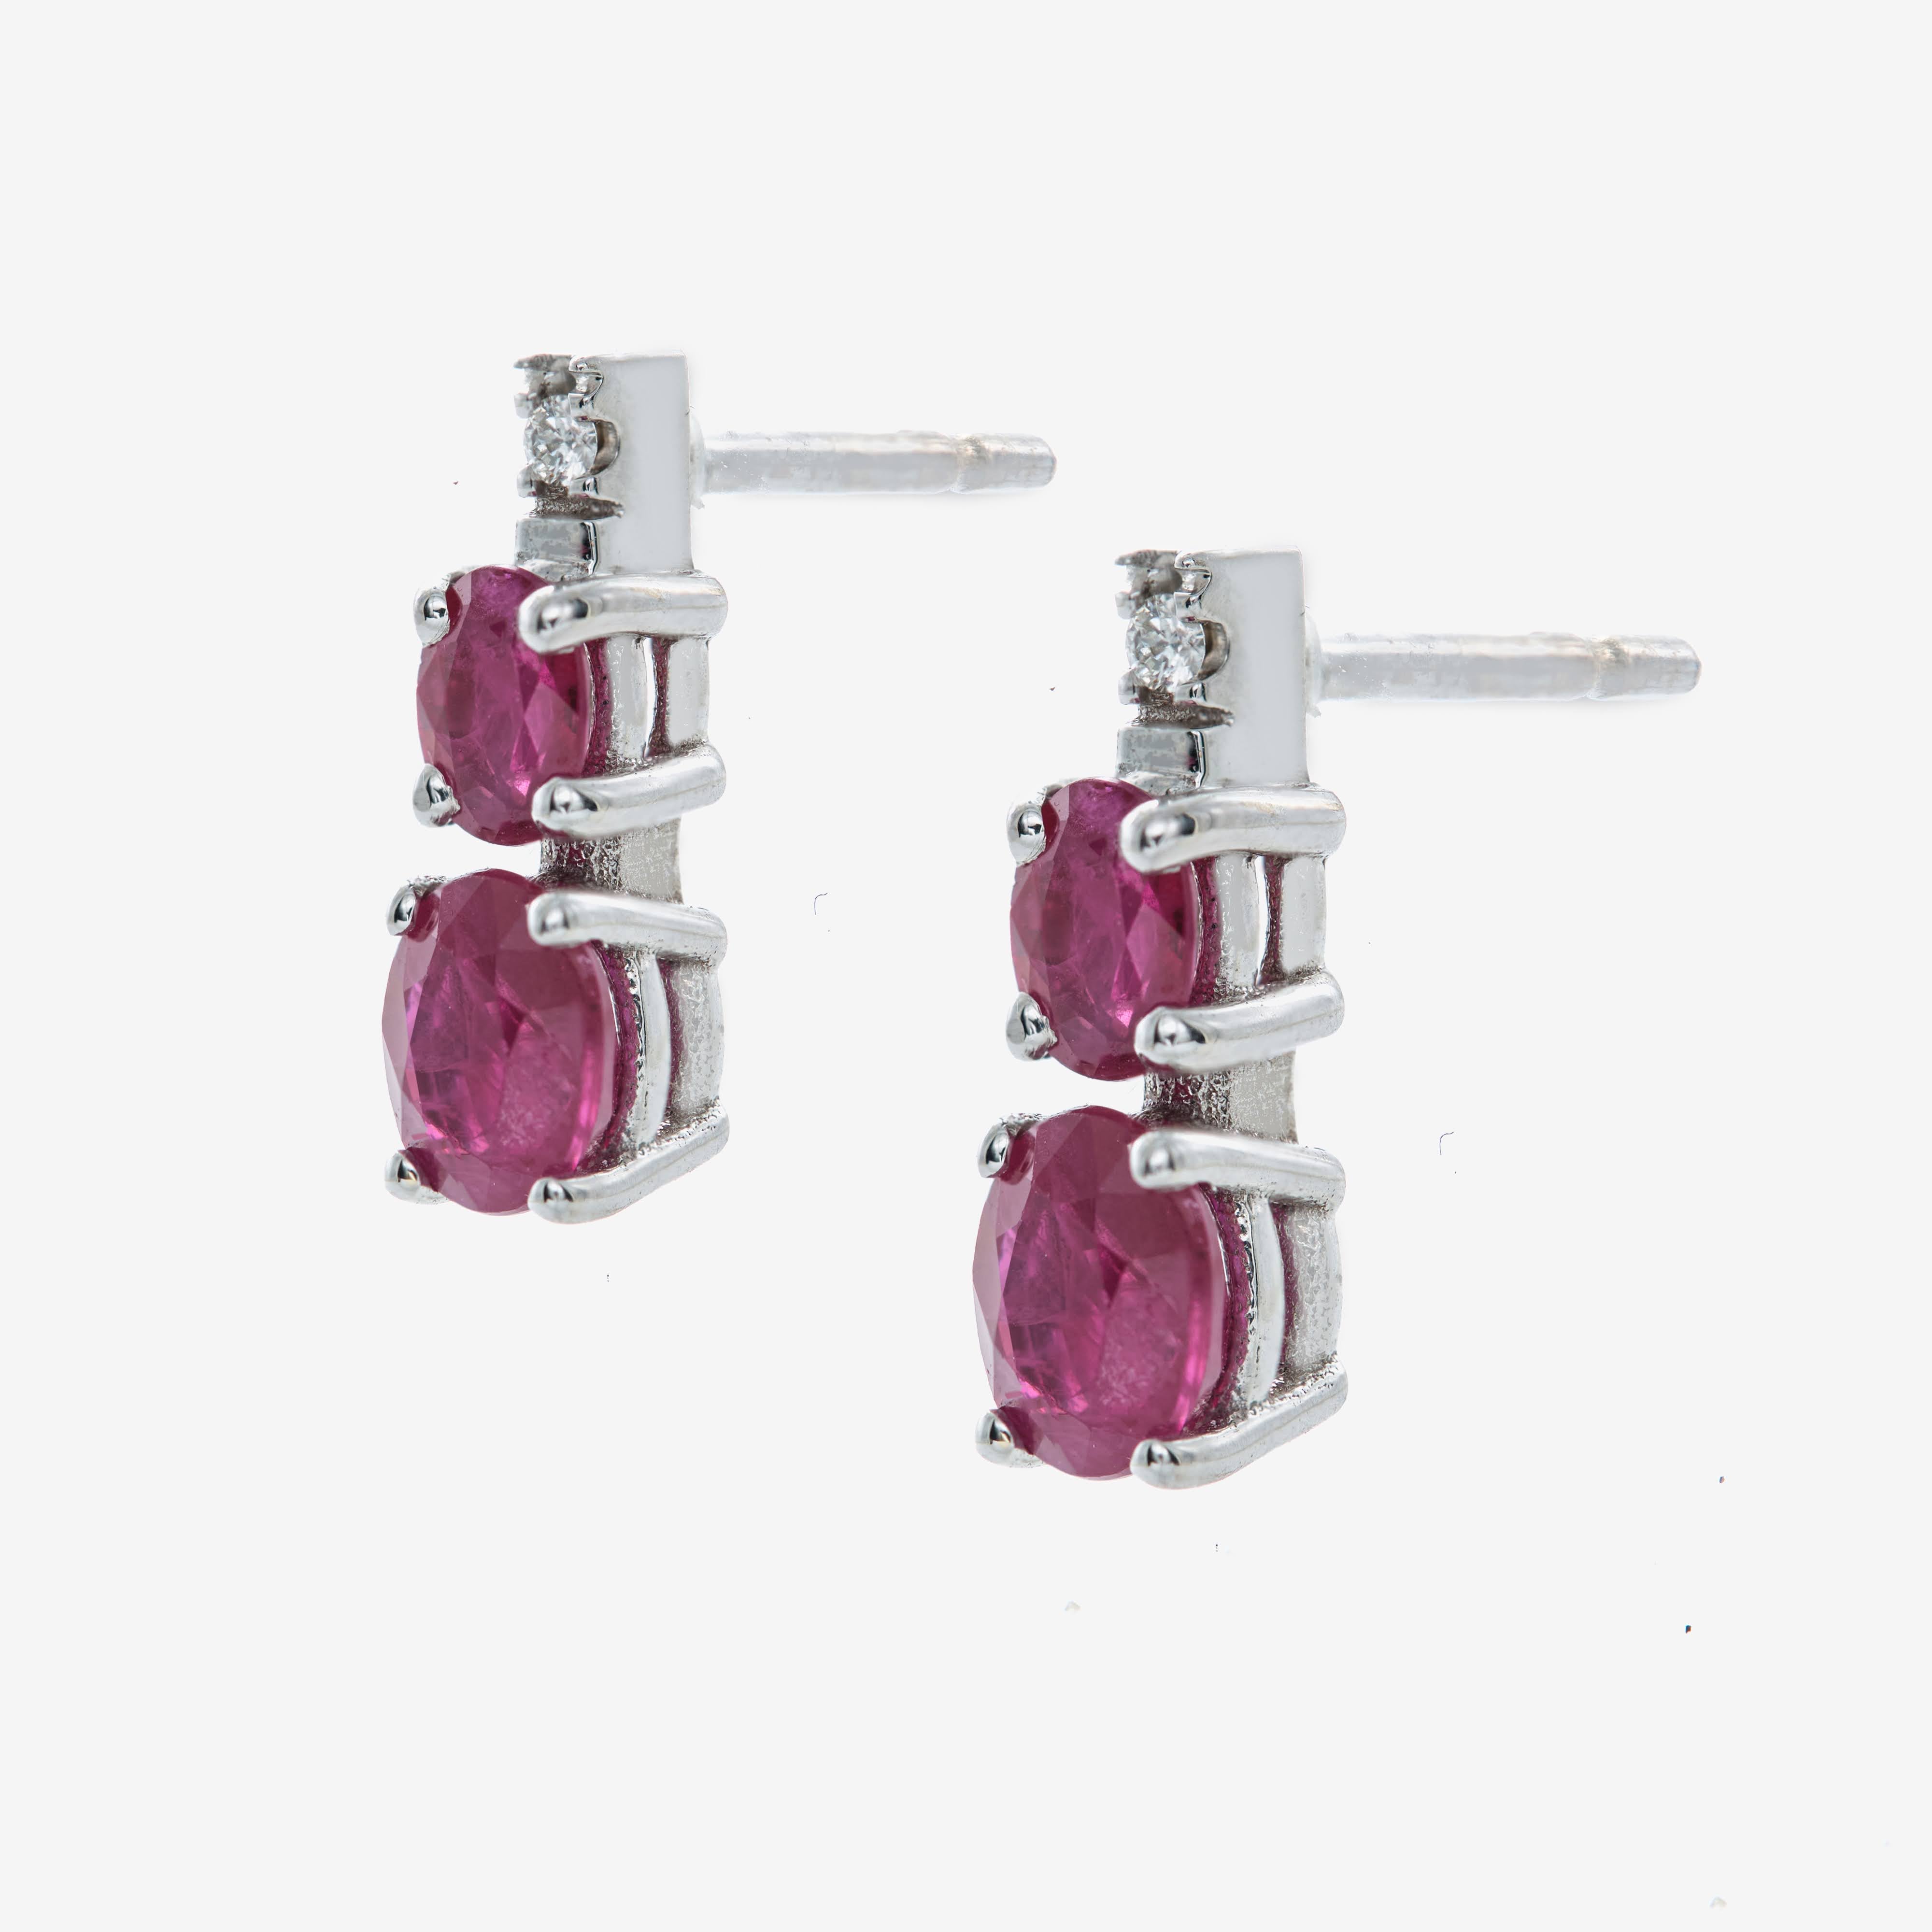 Smooth earrings with rubies and diamonds